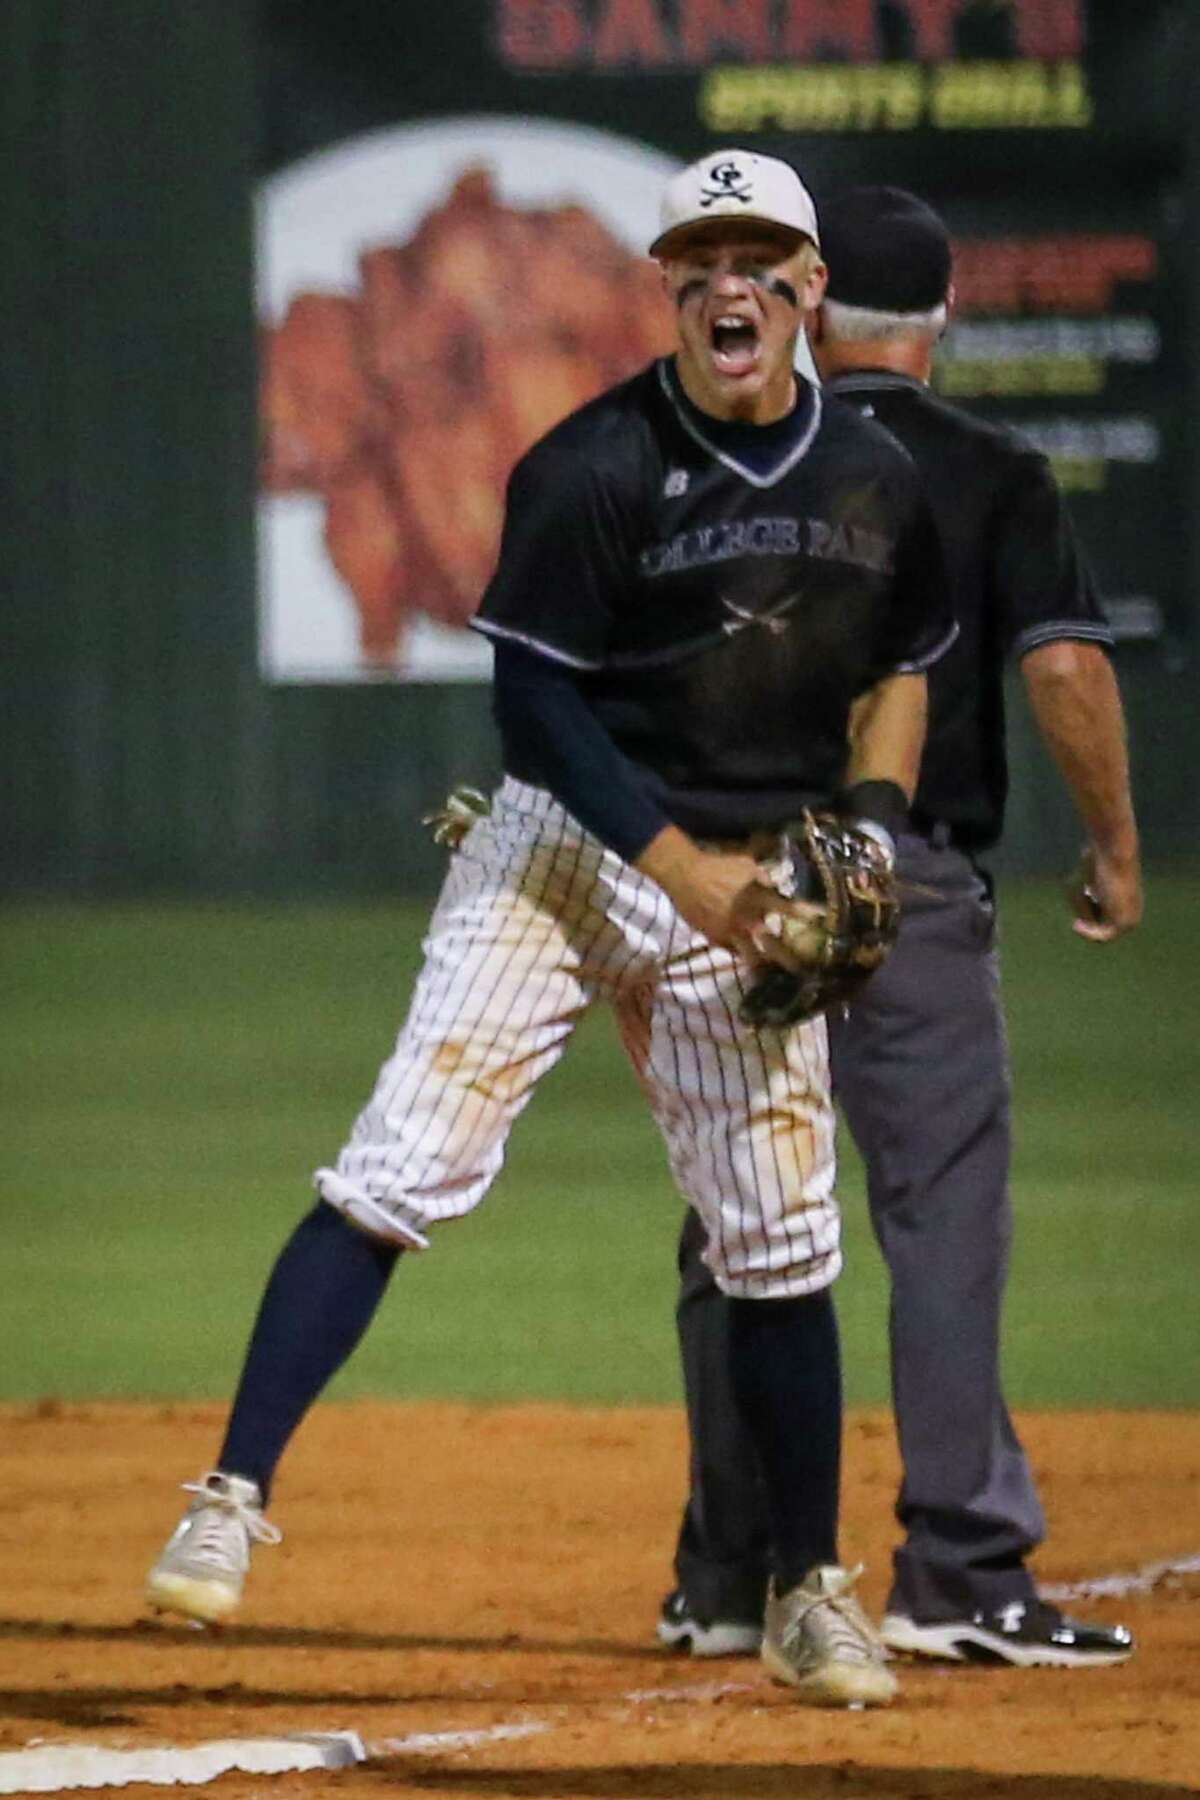 College Park's Michael Loggins (17) celebrates after getting the final out of the baseball game against Oak Ridge on Friday, May 18, 2018, at Oak Ridge High School. (Michael Minasi / Houston Chronicle)